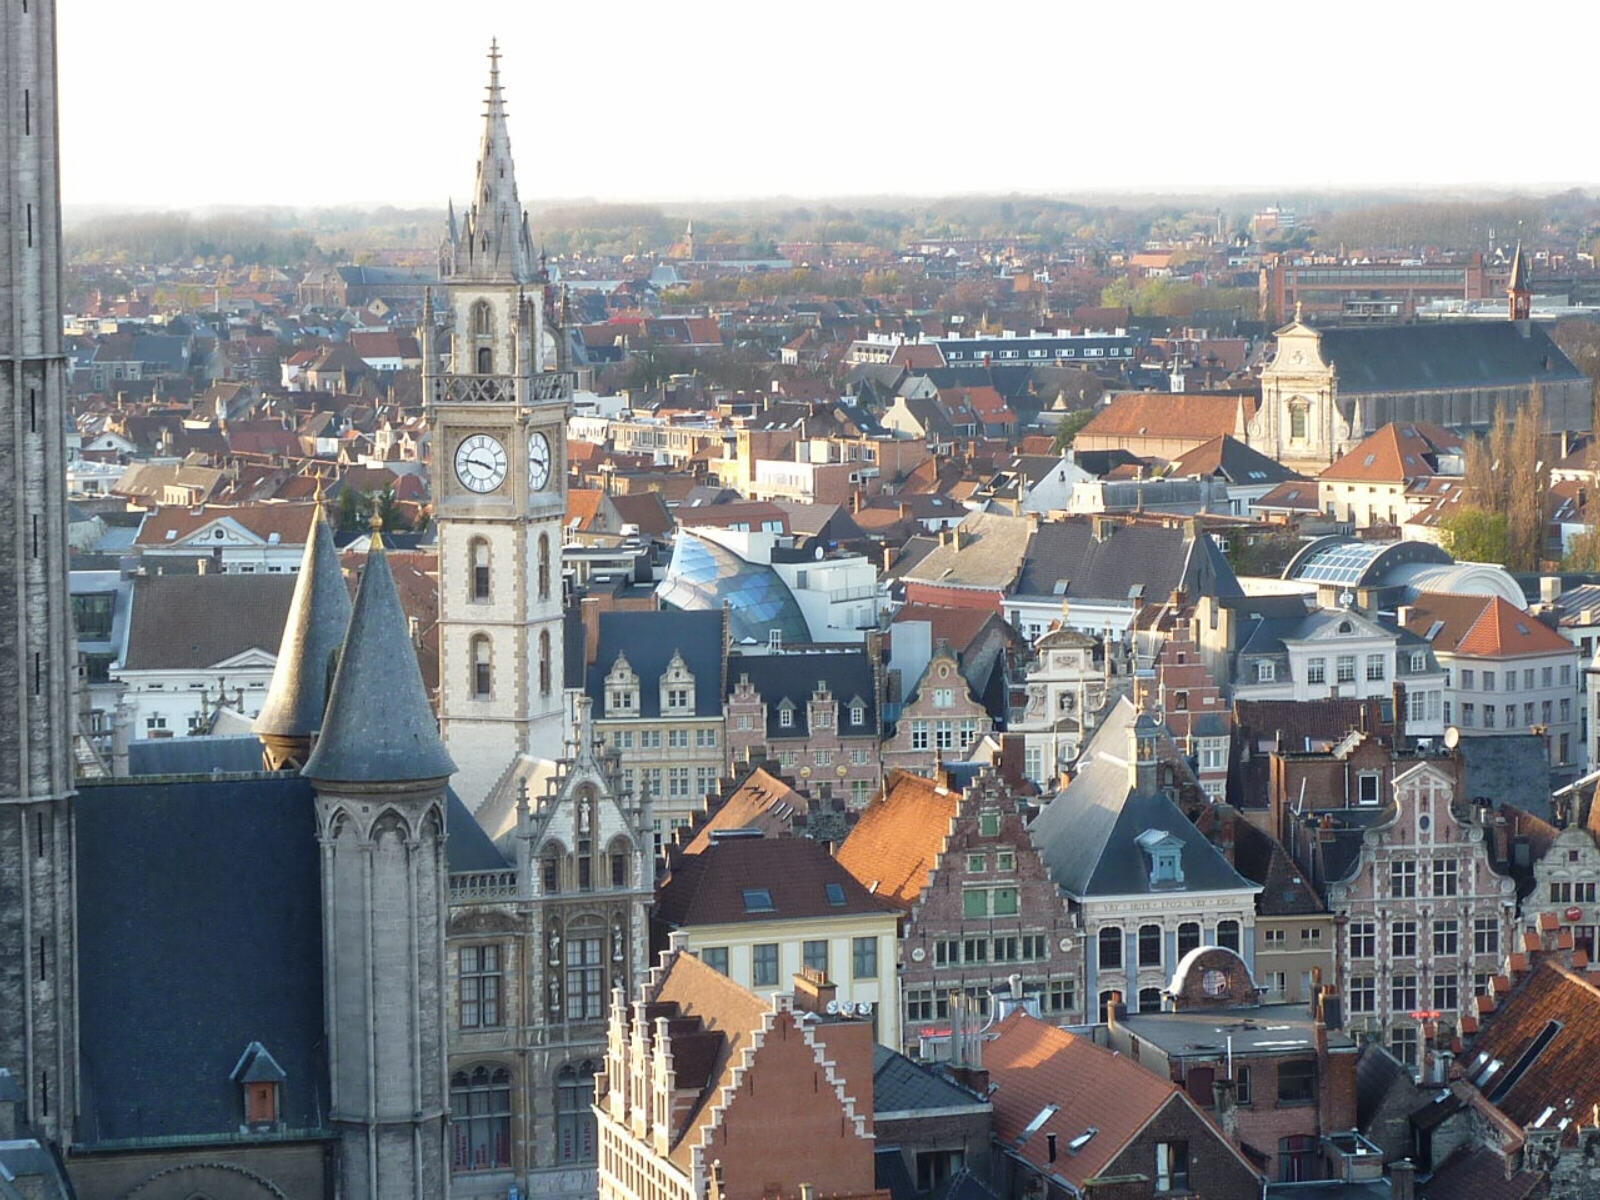 View of the old city of Ghent from a tower